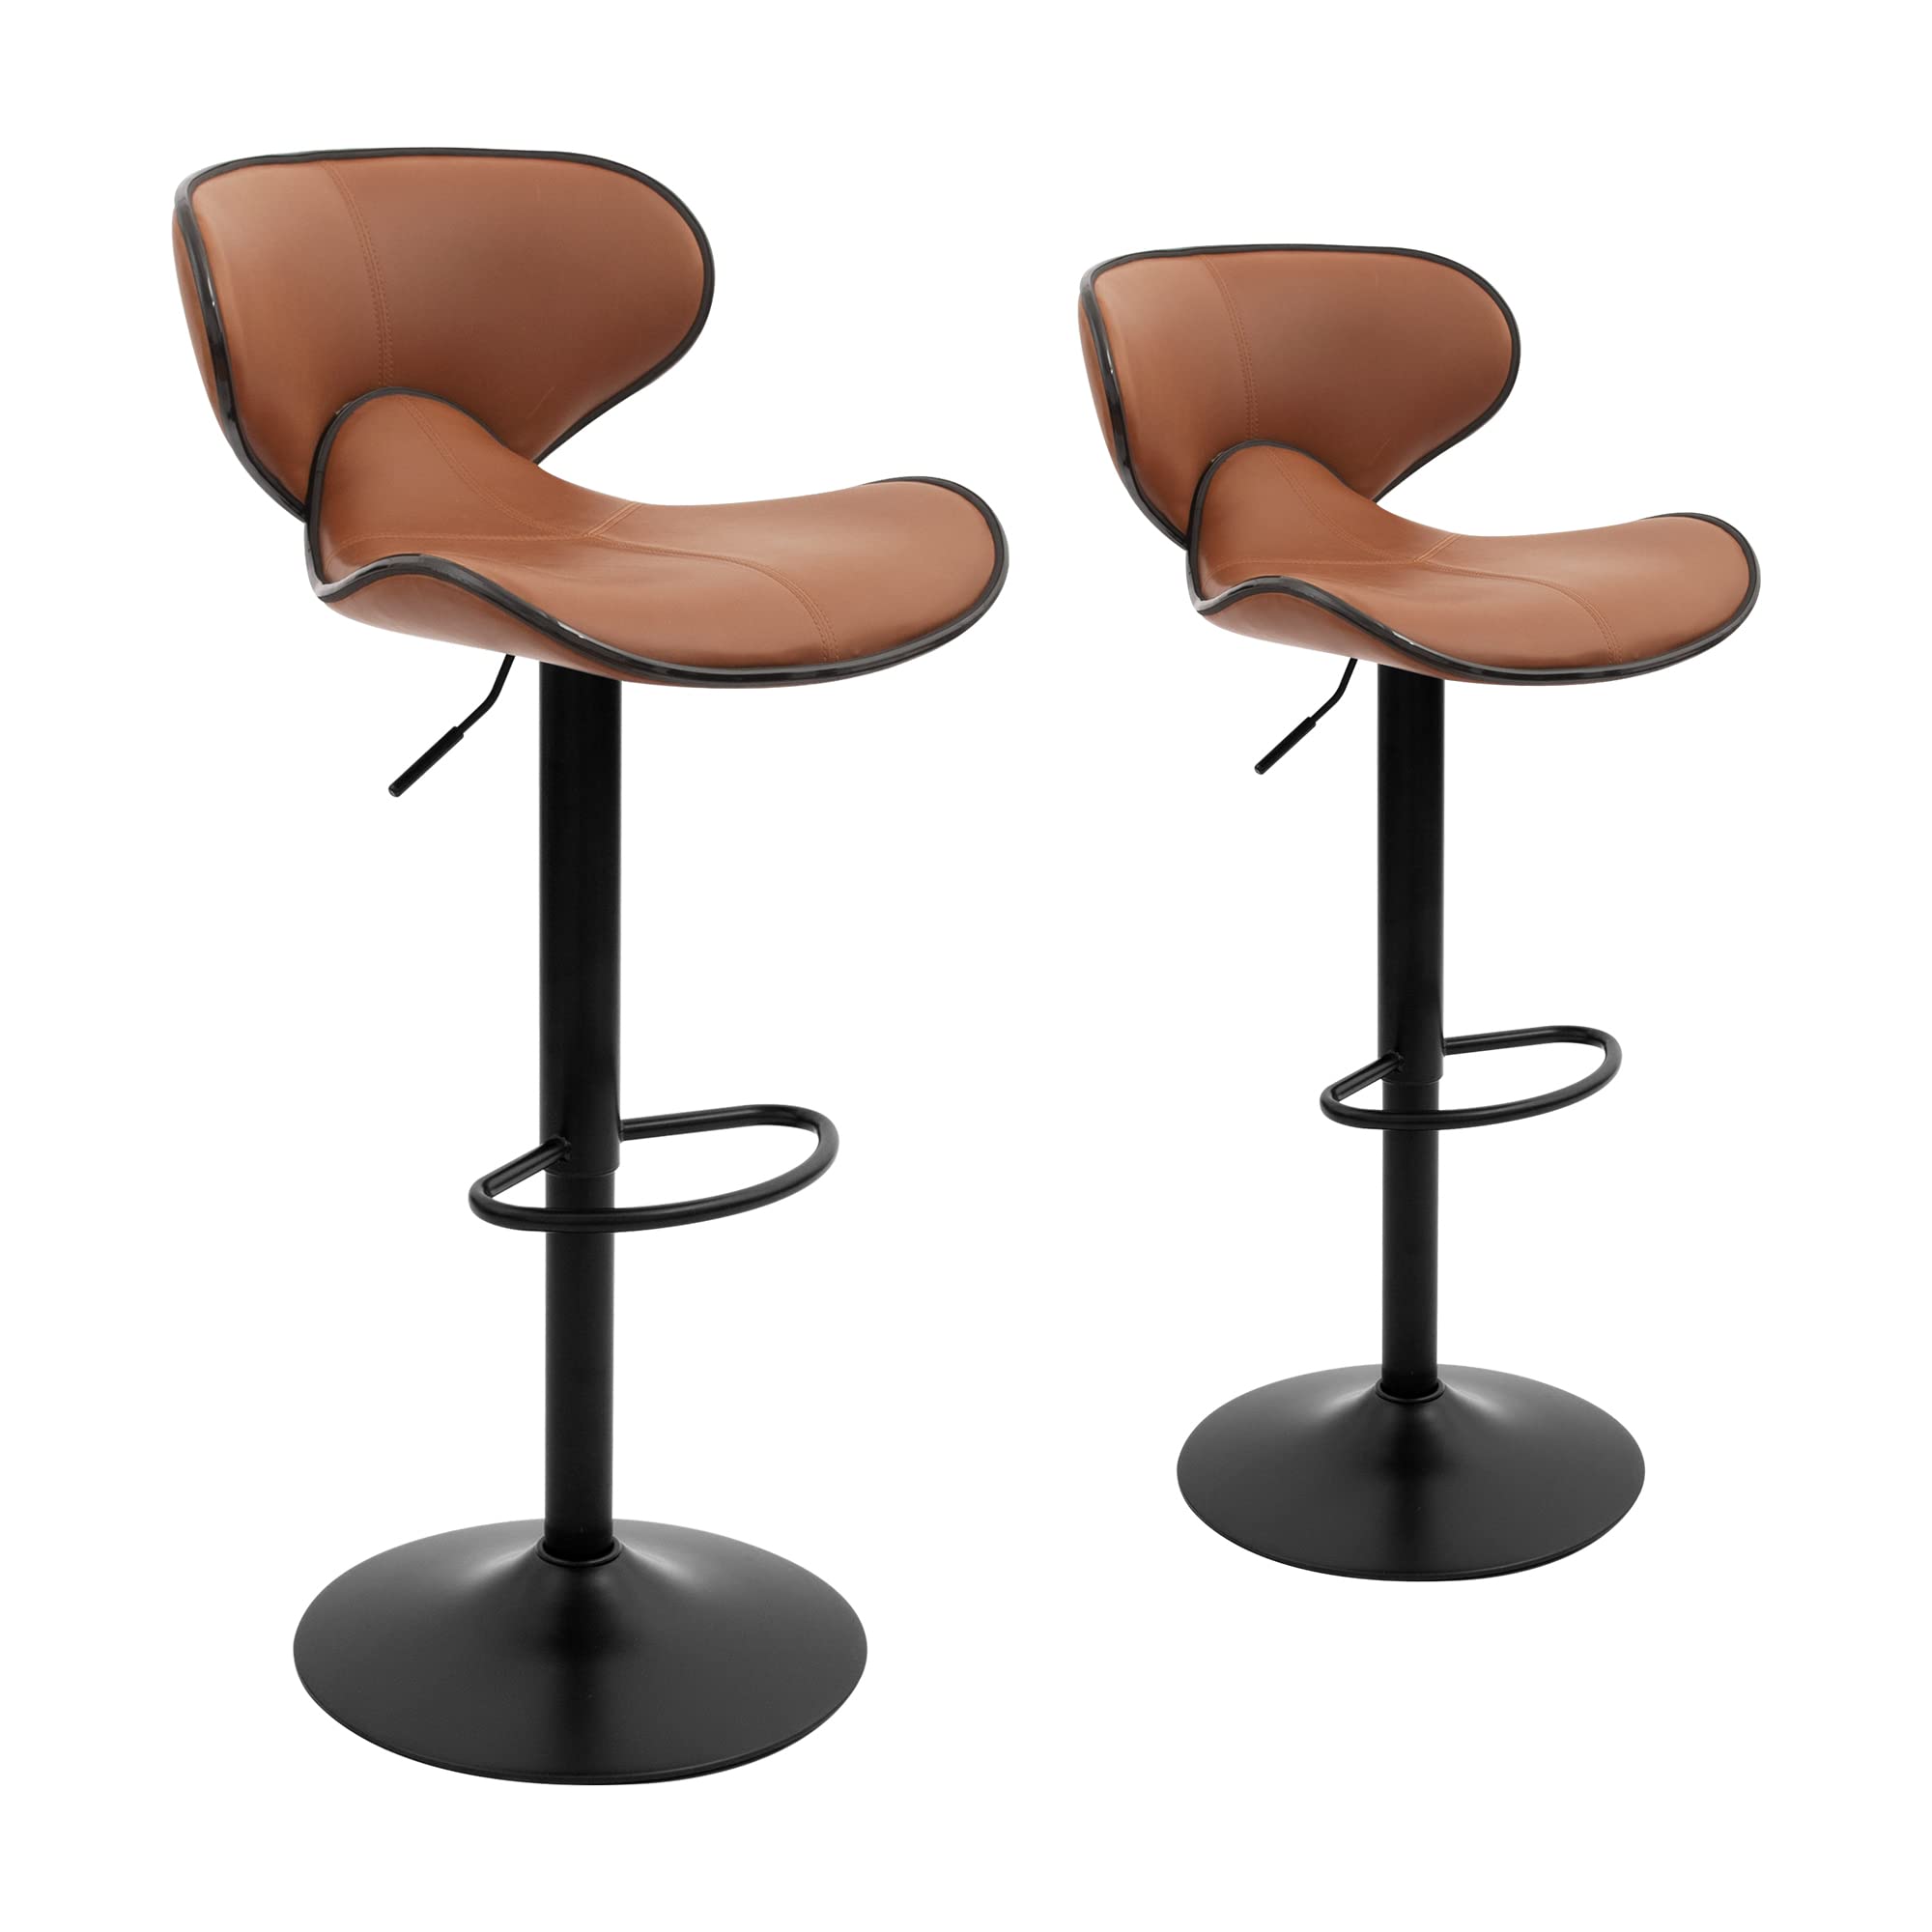 Swivel Adjustable Barstool, Counter Height Chairs w/Backrest and Footrest for Bar, Set of 2